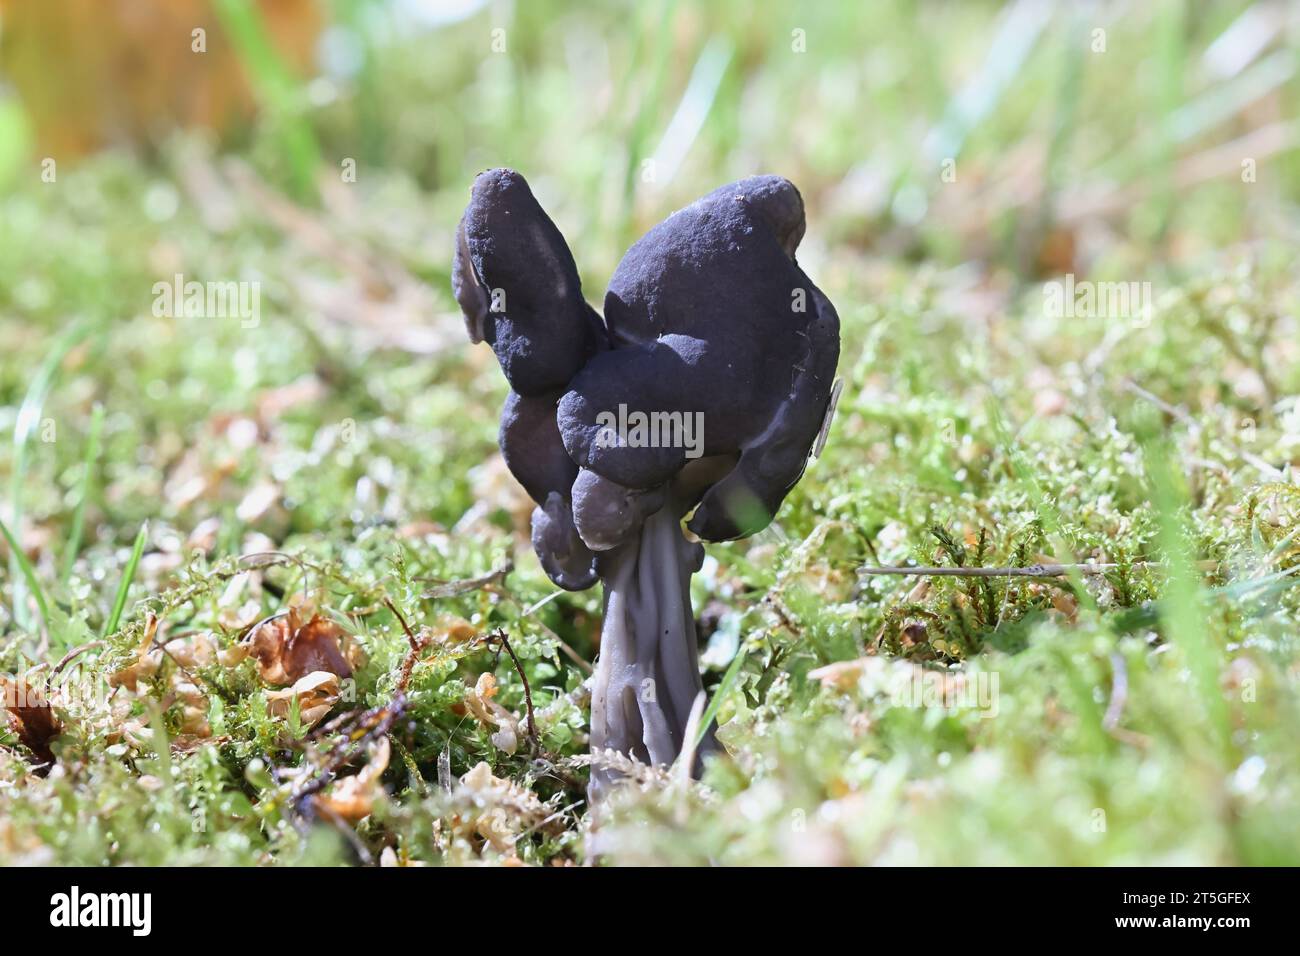 Helvella lacunosa, known as the slate grey saddle or fluted black elfin saddle, wild mushroom from Finland Stock Photo